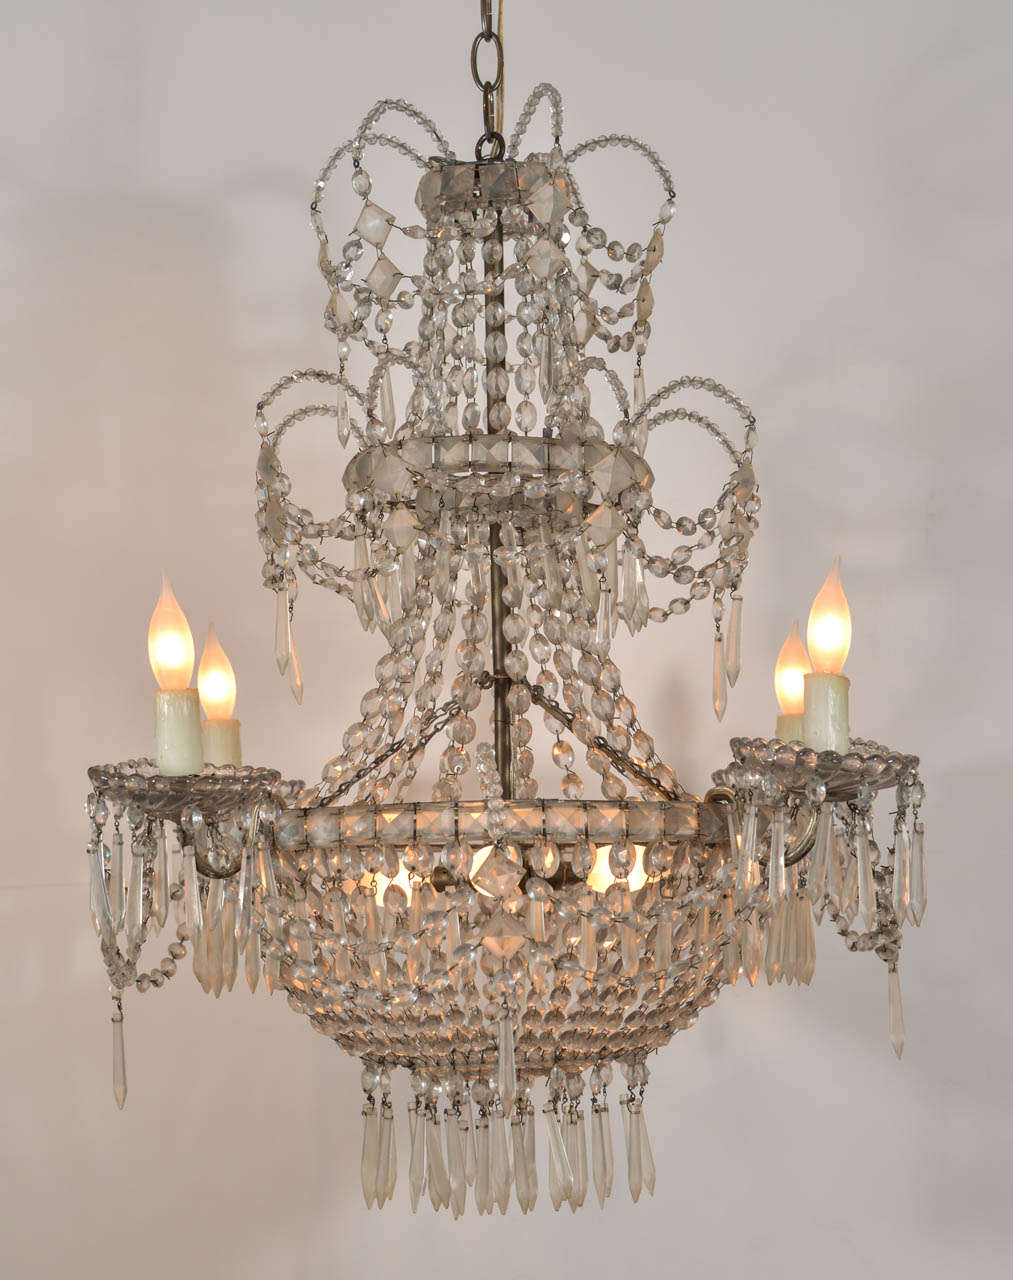 Seven-light crystal three-tier chandelier, created circa 1860-1880 attributed to the Royal Factory of glass and crystal of La Granja (Real Fa´brica de Cristales de La Granja) in San Ildefonso, Sergovia, Spain. This cut-glass chandelier is newly